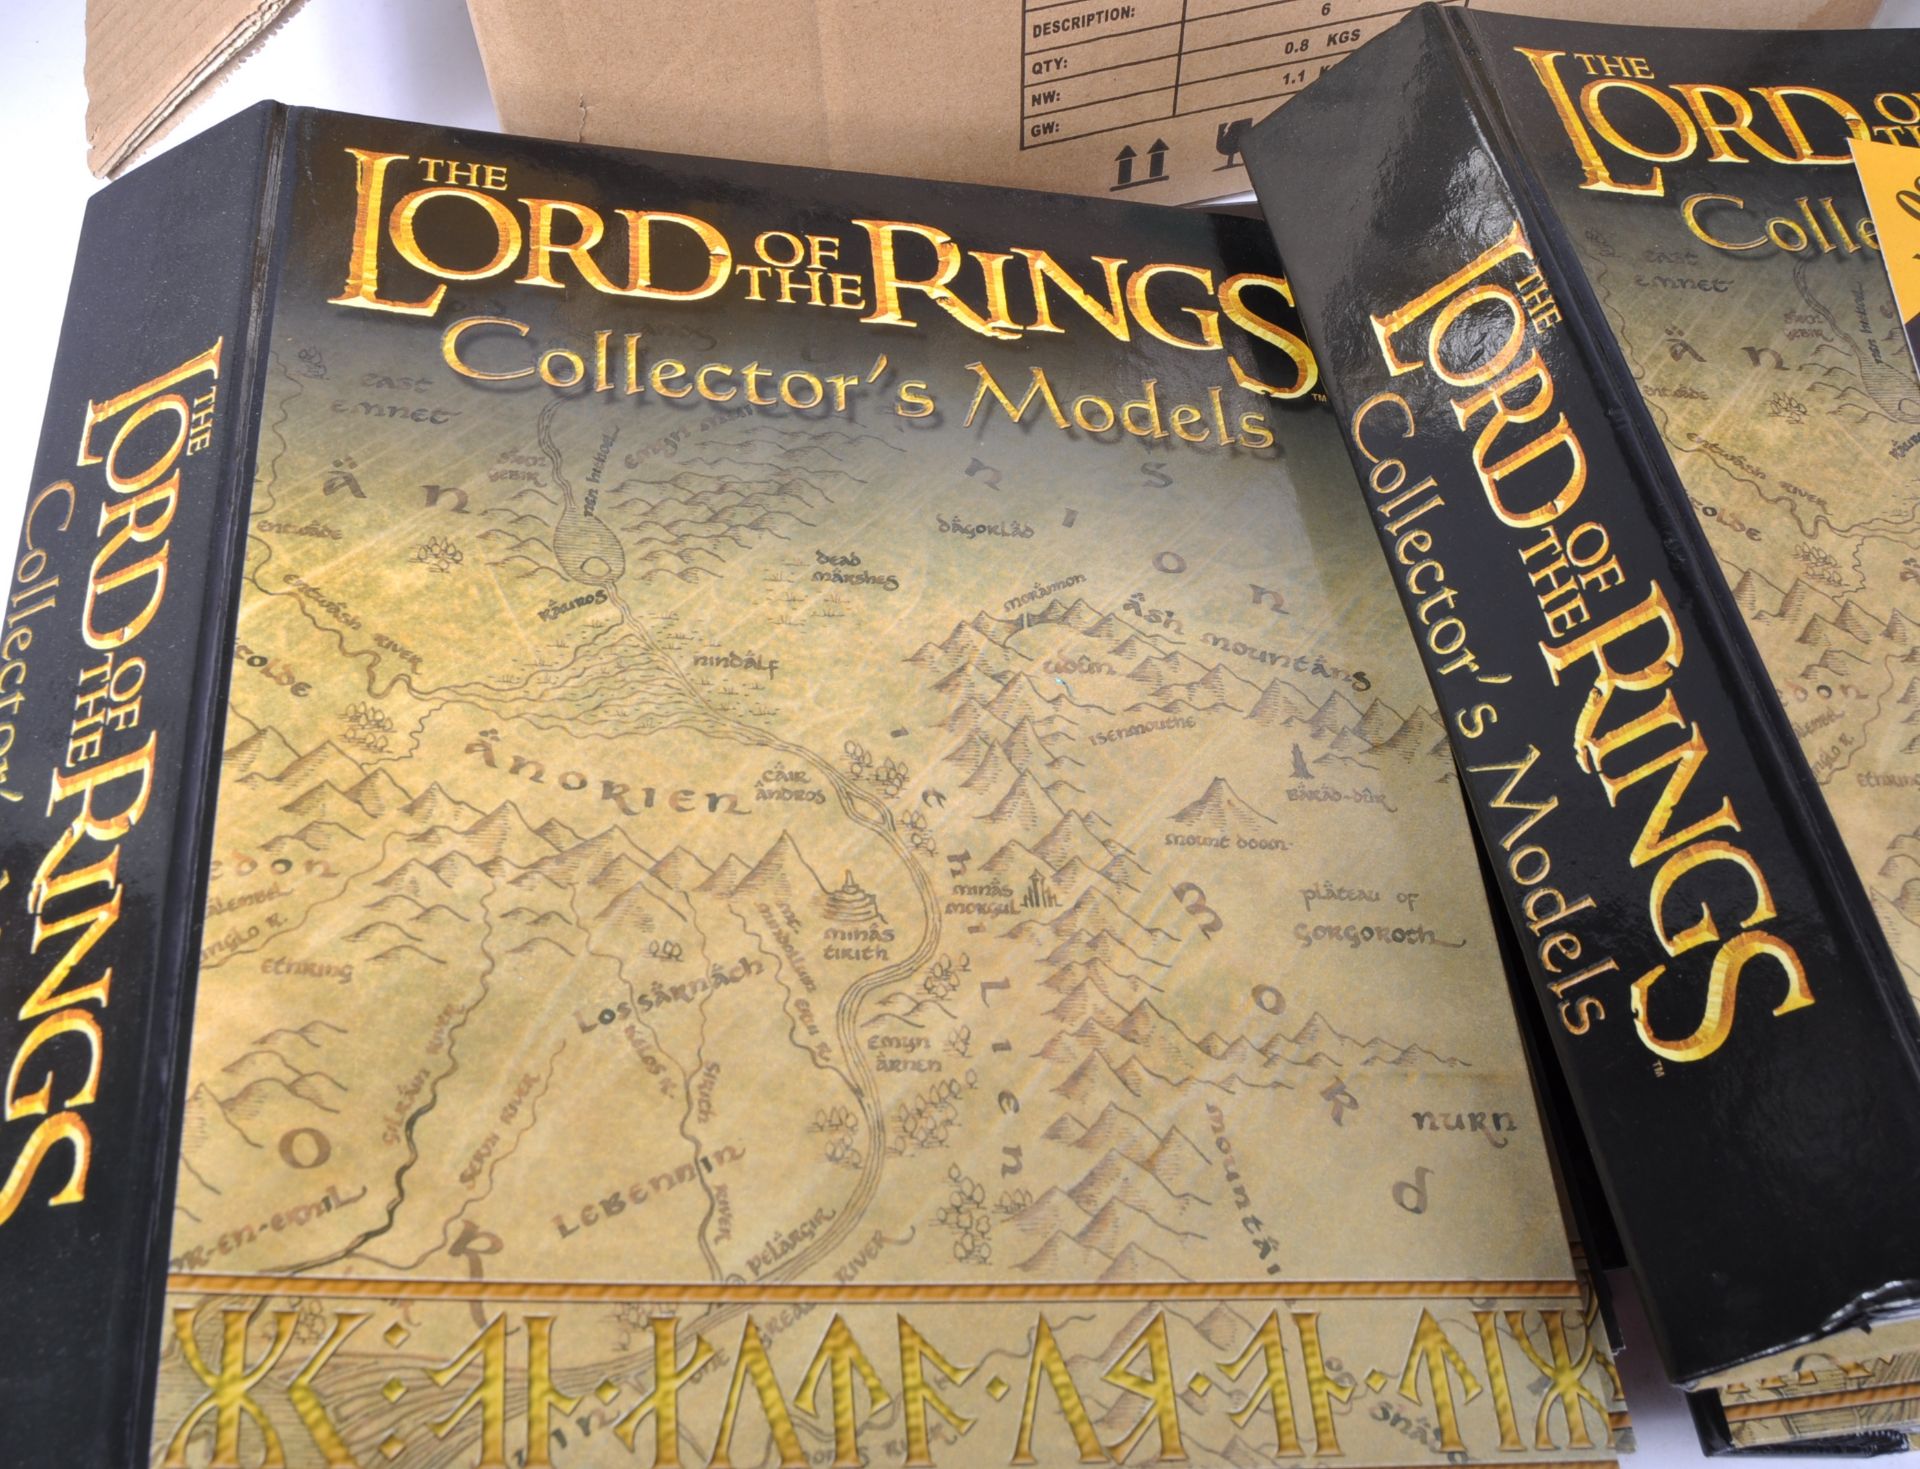 THE LORD OF THE RINGS - EAGLEMOSS - COLLECTOR'S MODELS - Image 2 of 8